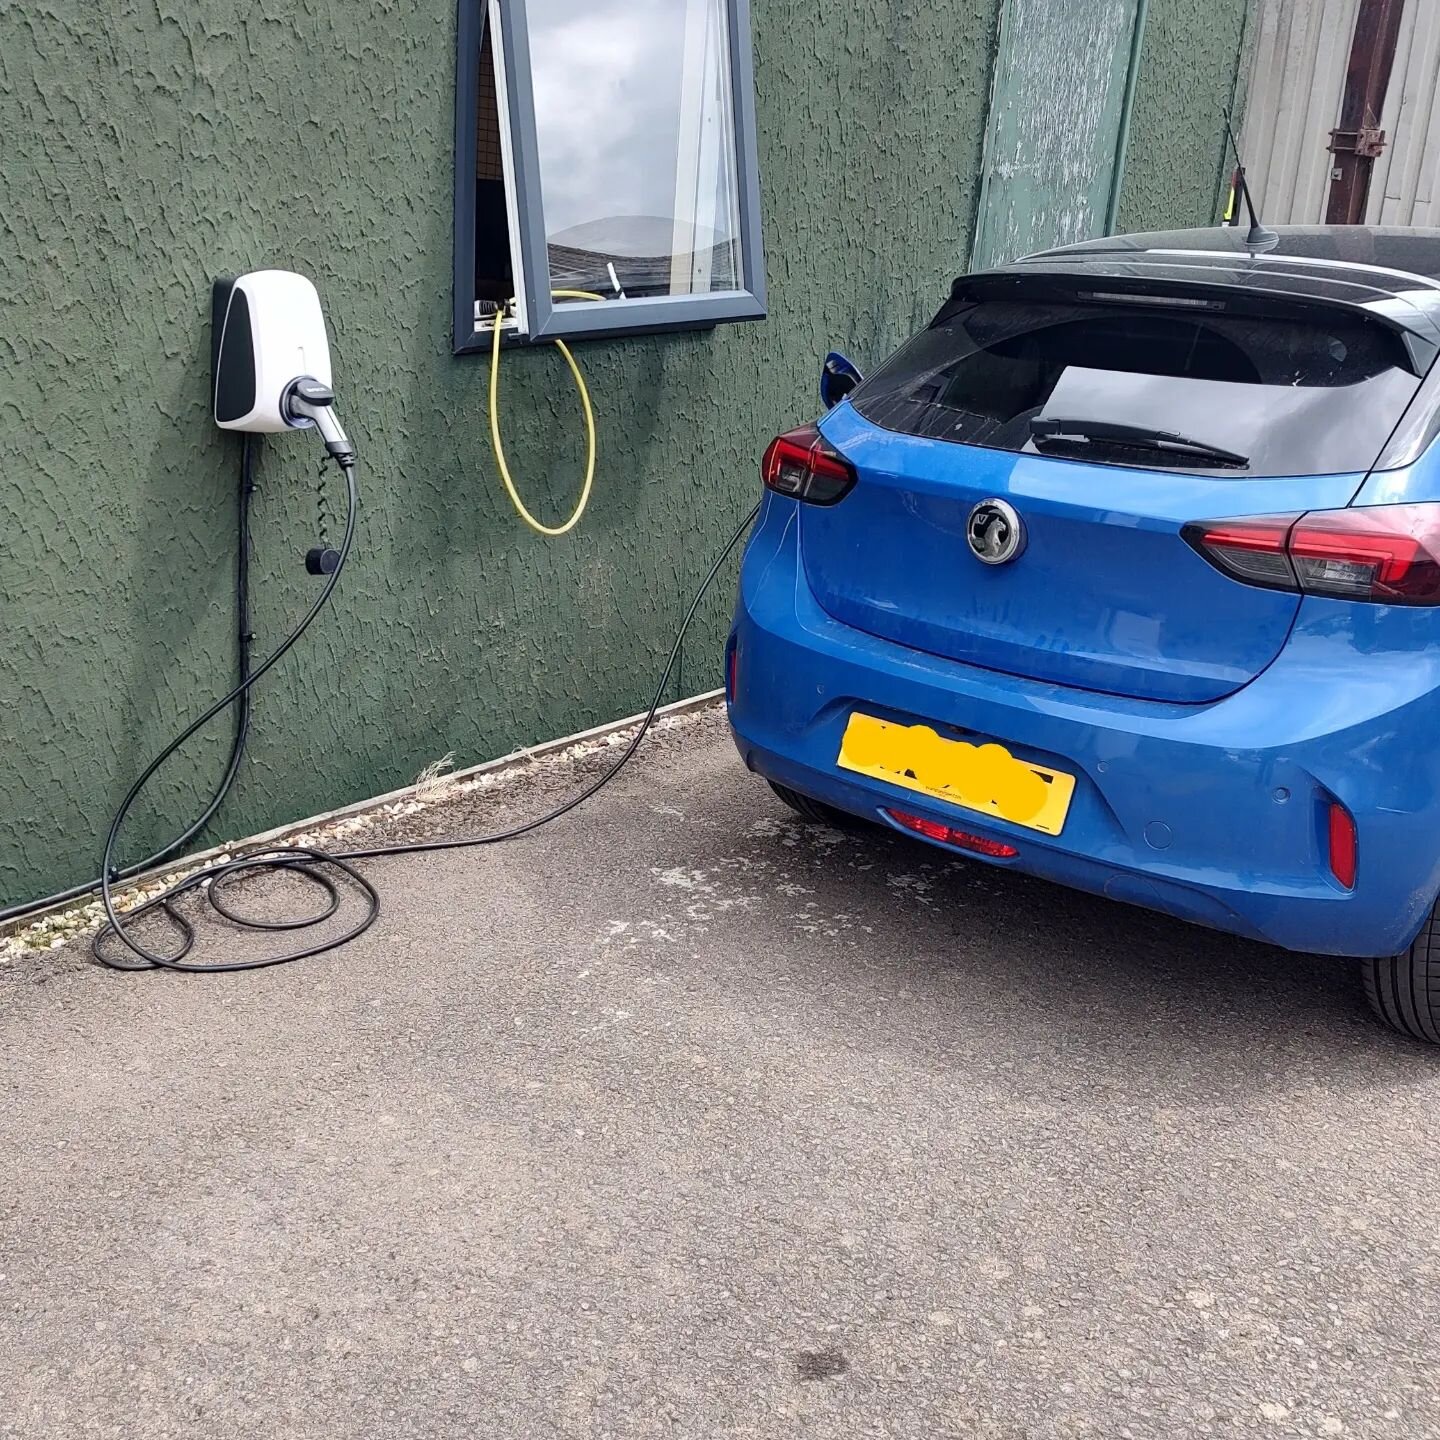 Installation of a 22kw evbox charger last week. #evcharger #evbox #electricvehicle #electrician #electricianofinstagram #northamptonelectricians